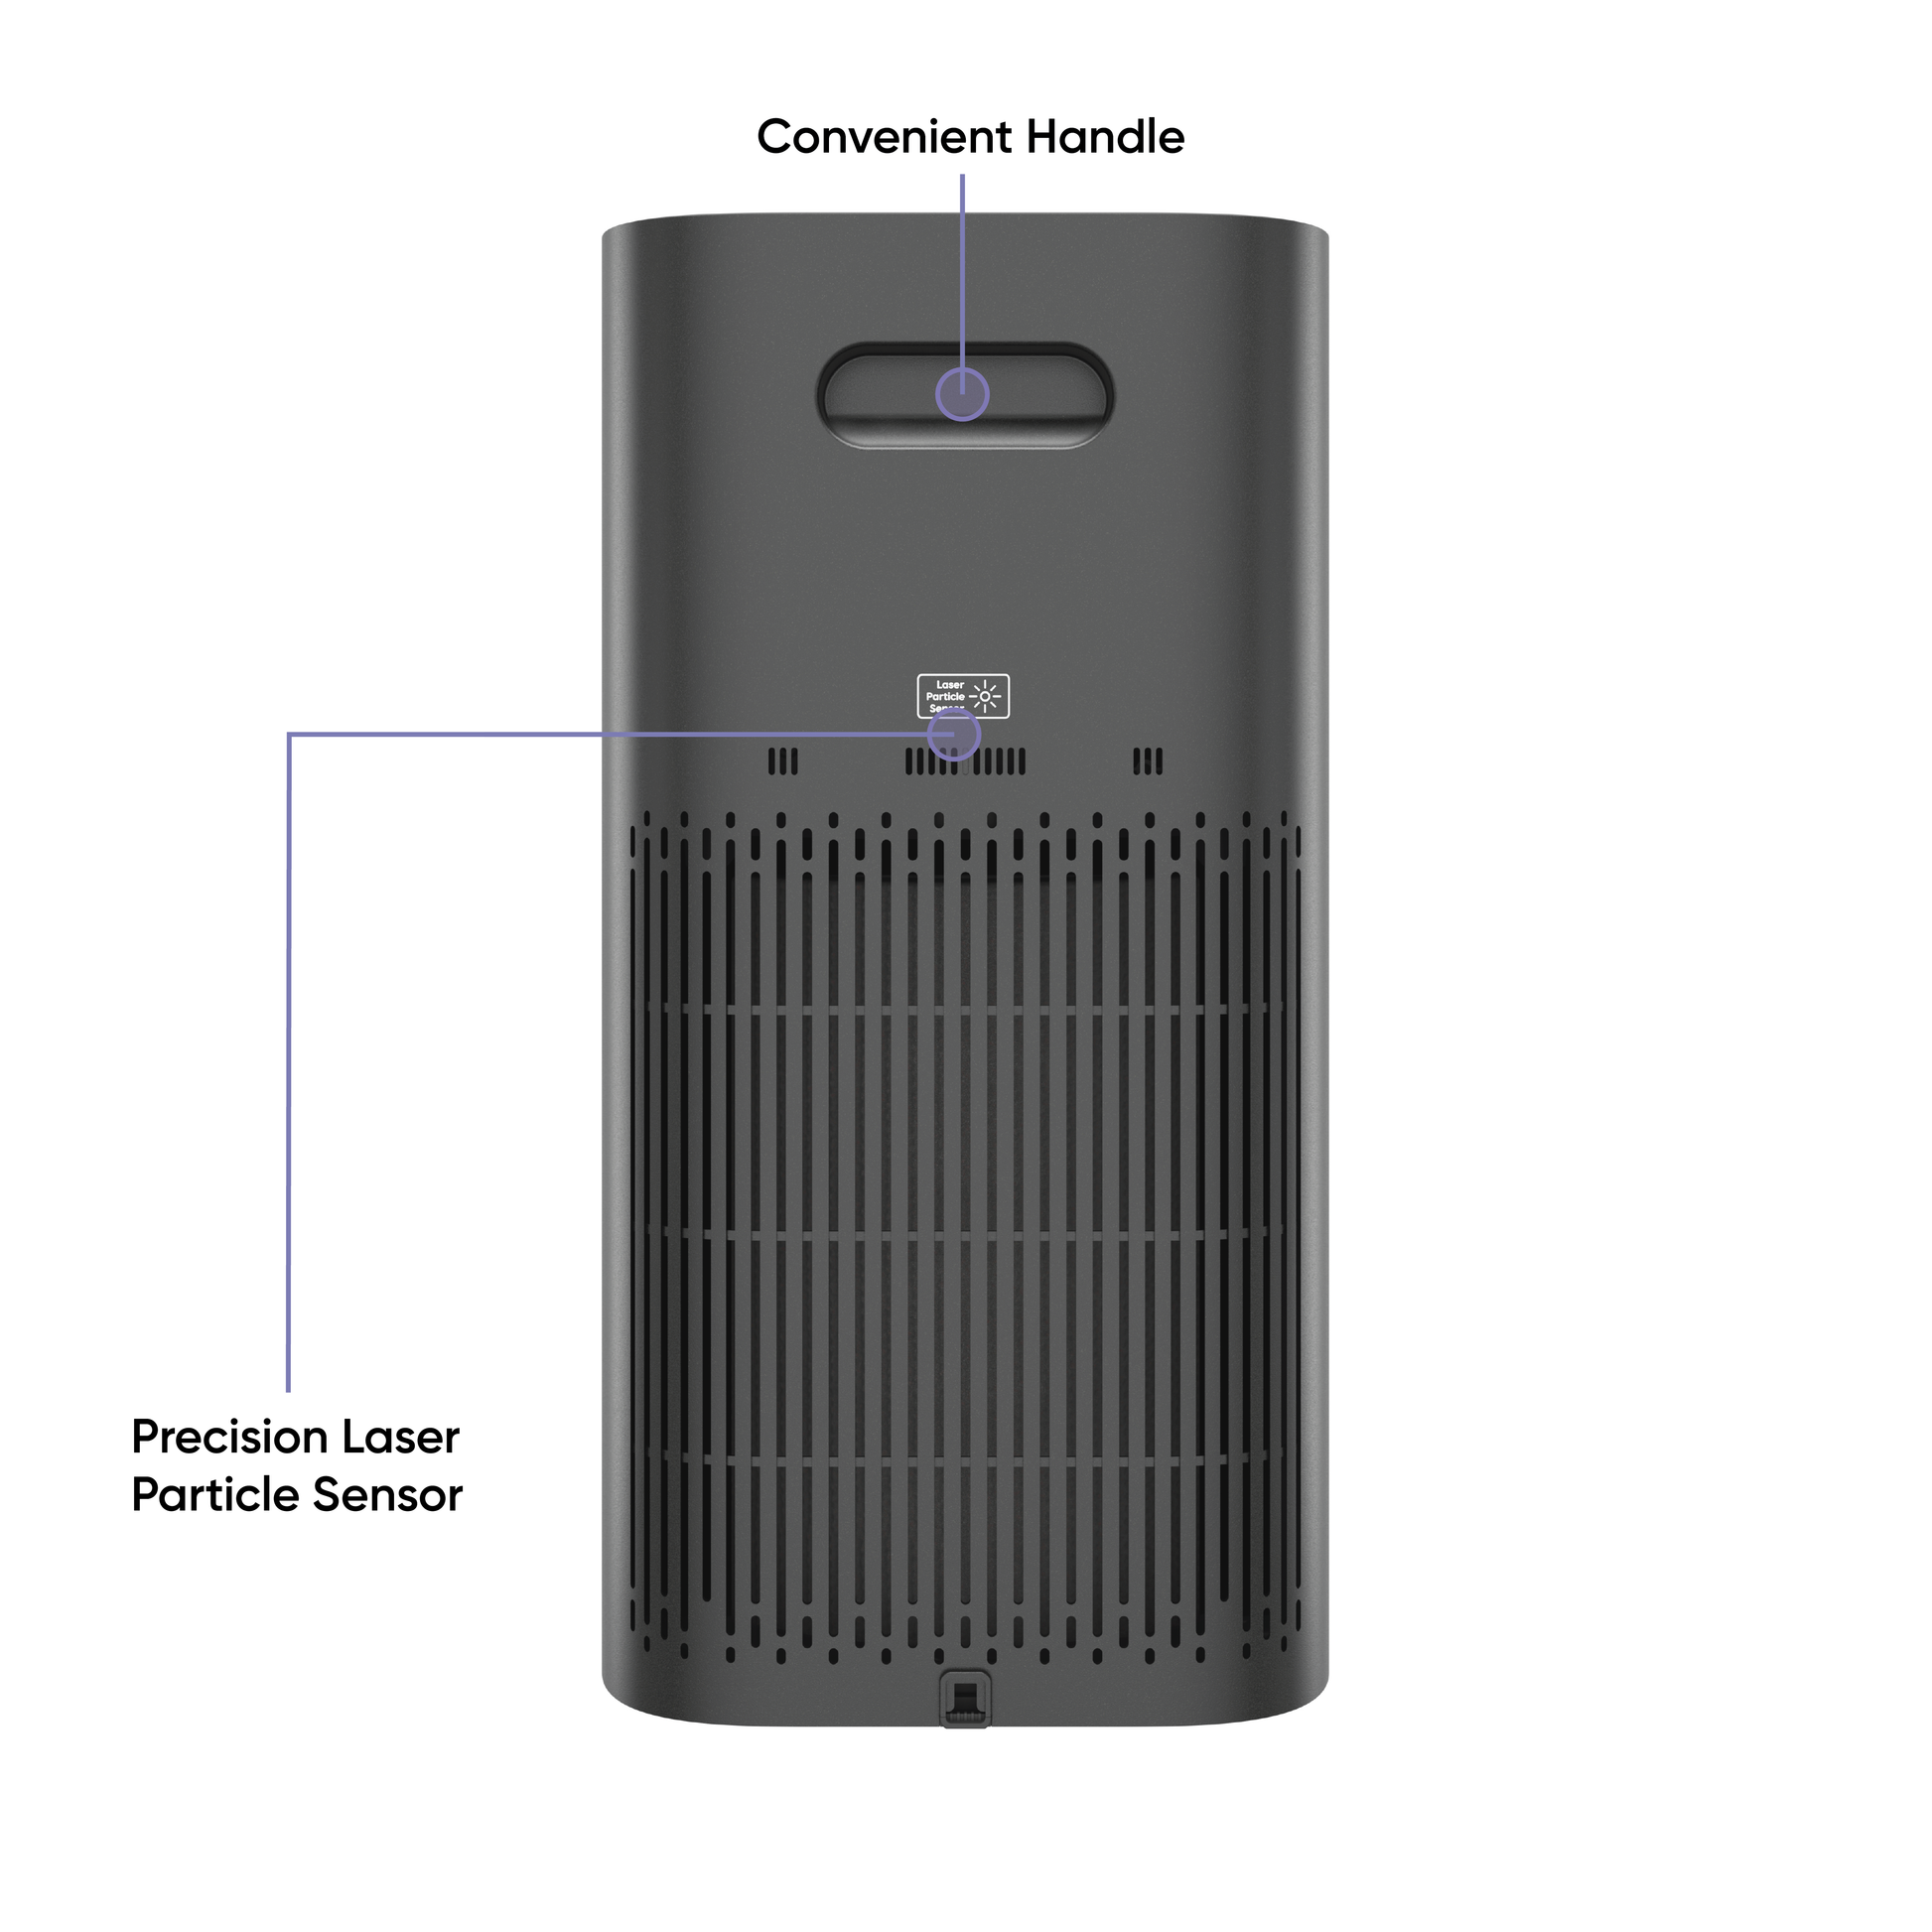 Wyze Air Purifier back view with text overlay saying "Convenient Handle," and "Precision Laser Particle Sensor."